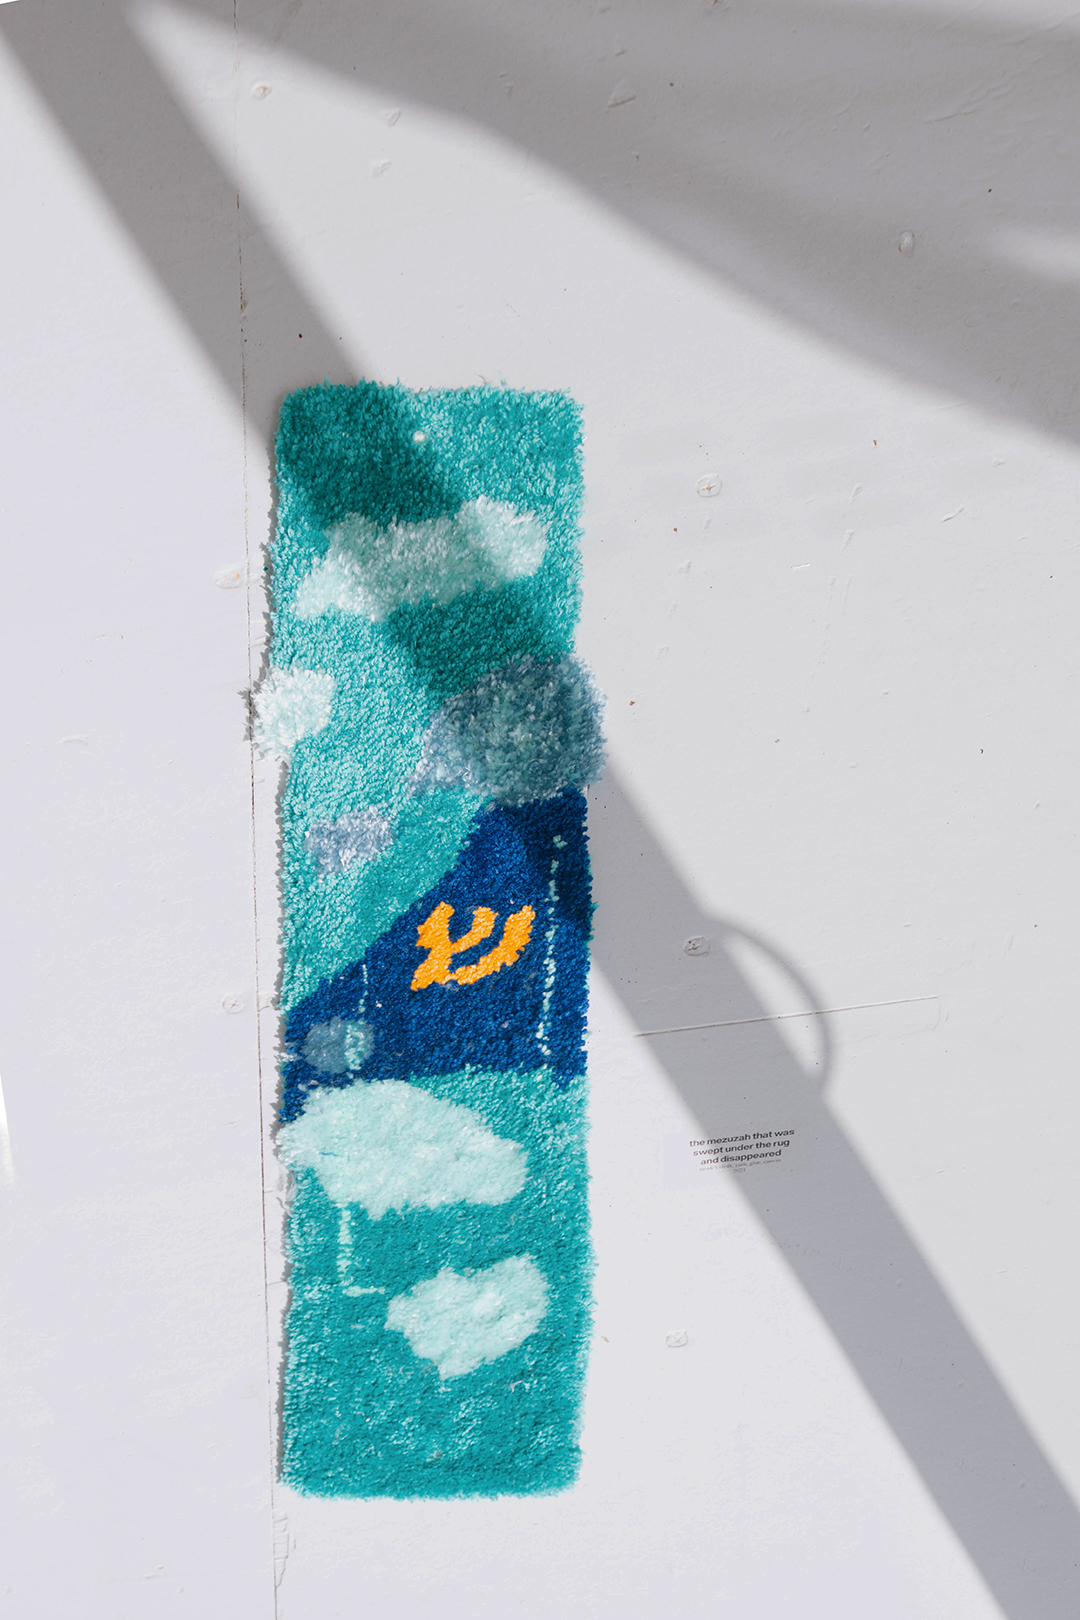 the mezuzah that was swept under the rug and disappeared